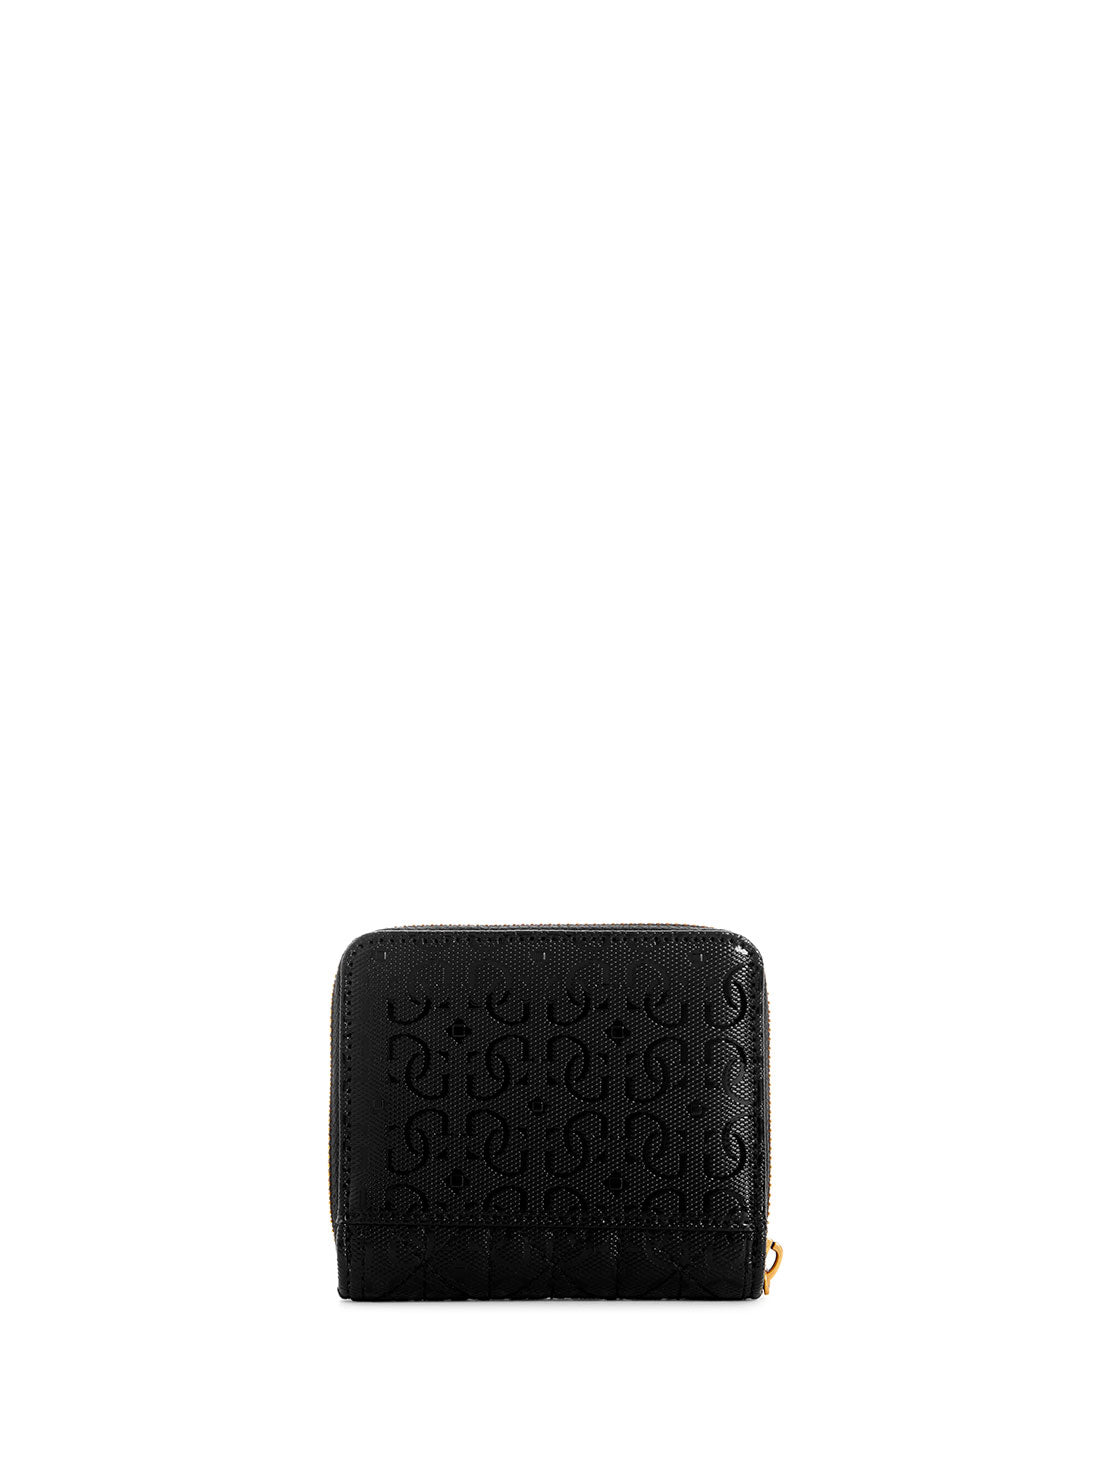 GUESS Women's Black Aveta Quilted Small Wallet GB898737 Back View